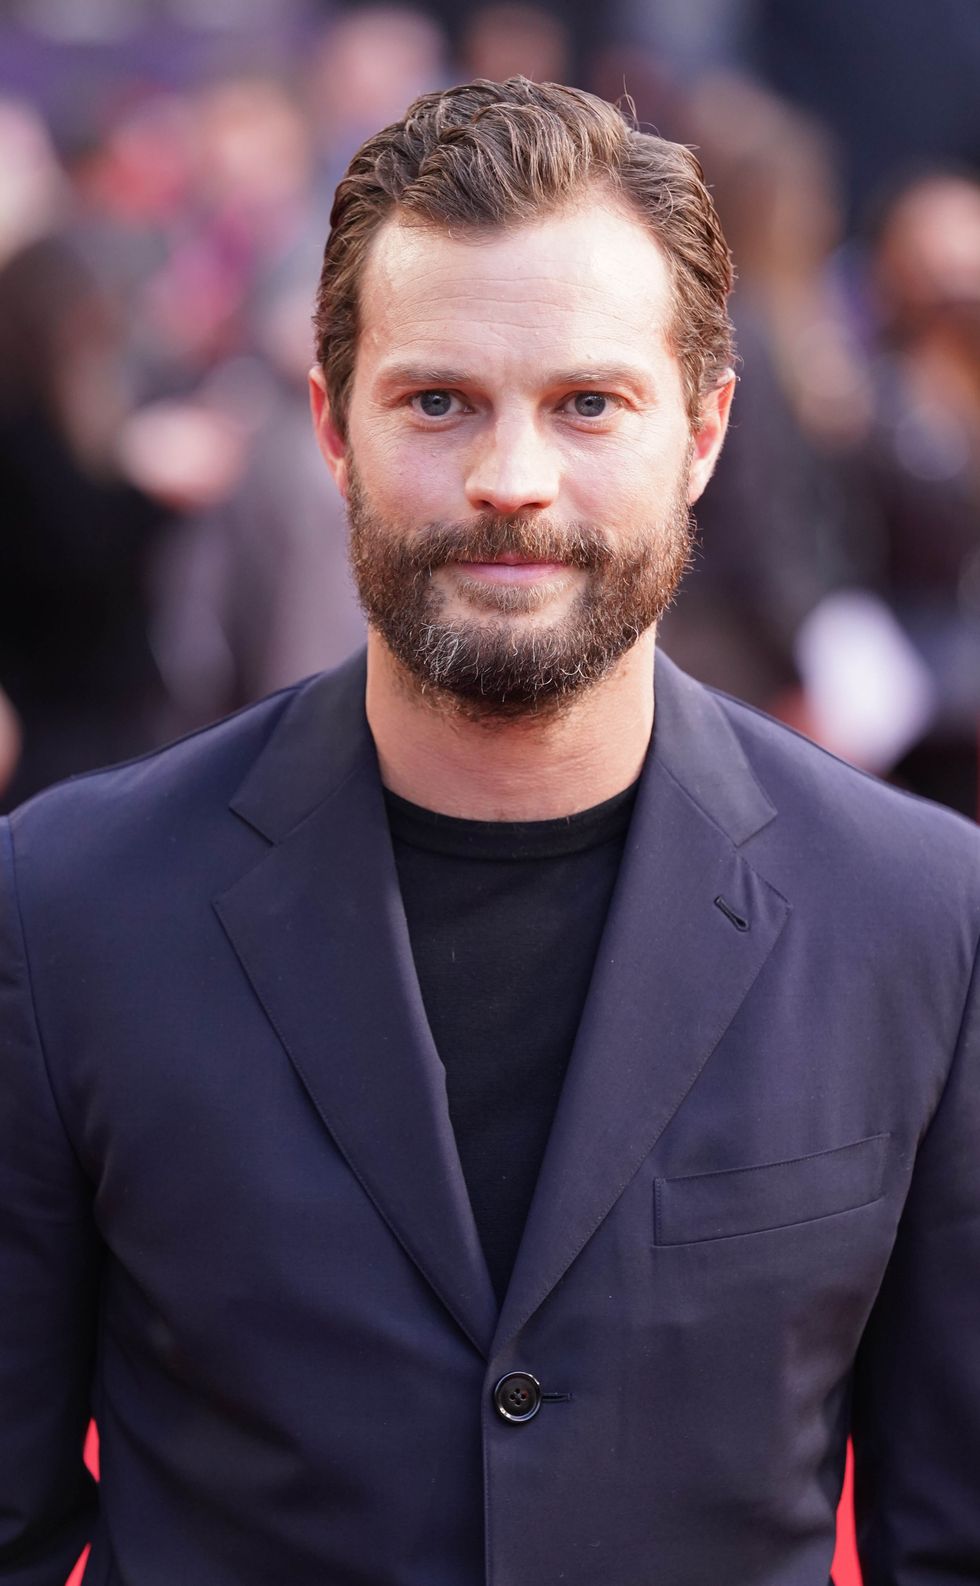 <p>The 50 Shades of Grey actor said his father had always been supportive of his career choices and attributes much of his success to him.<br></p>